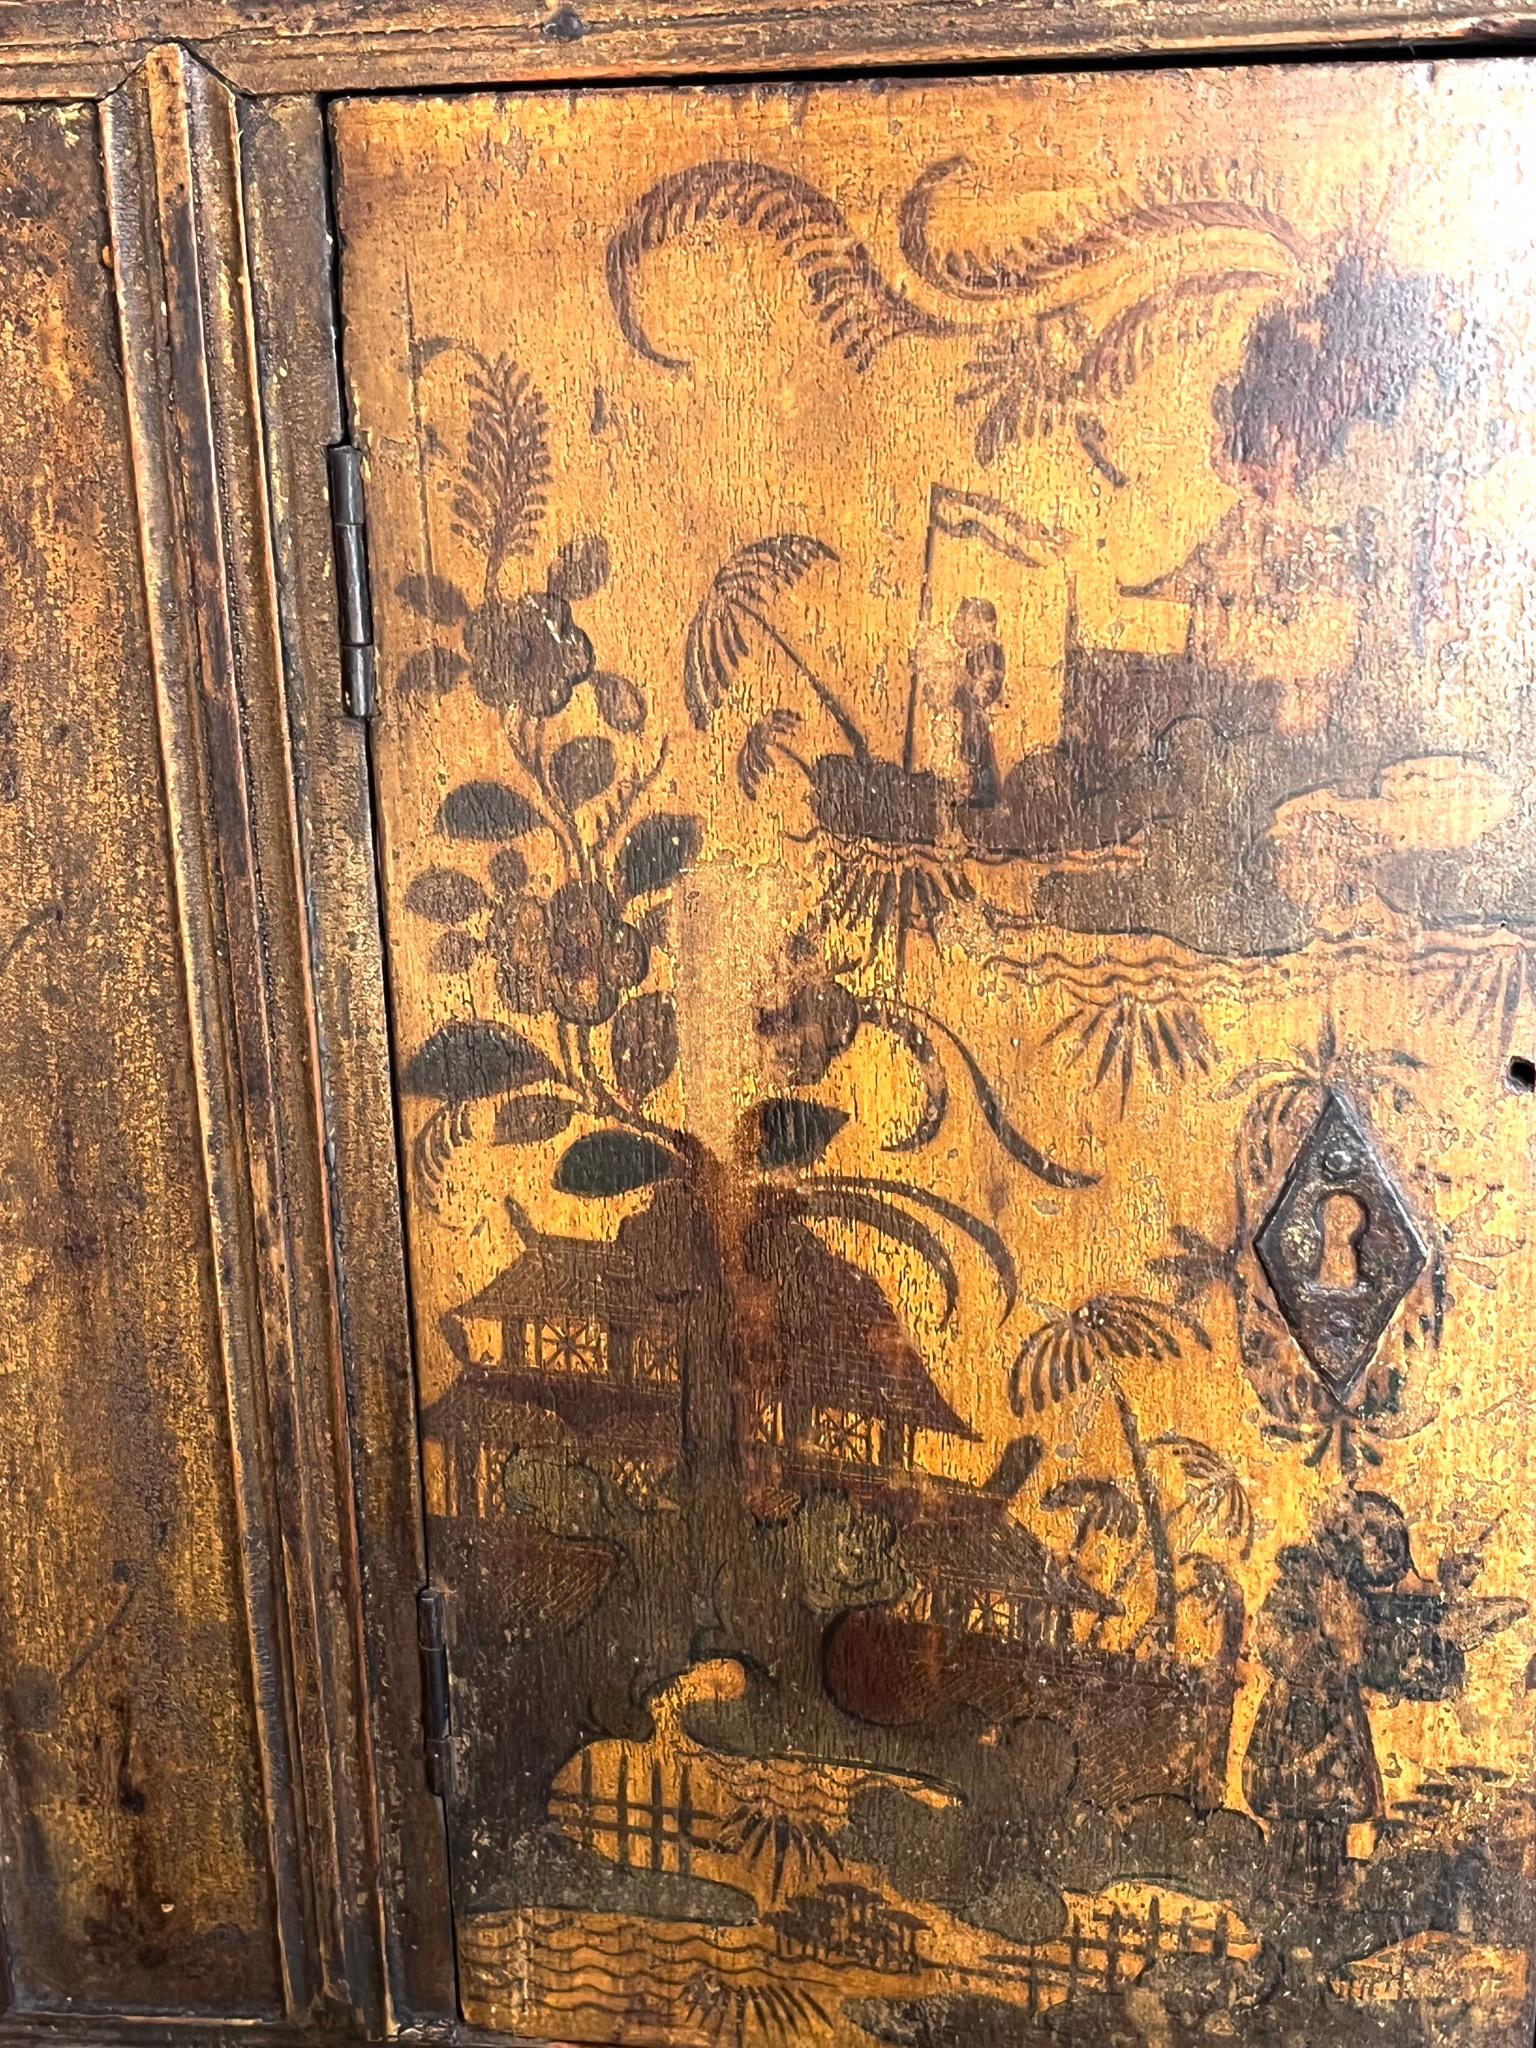 French shelf ( région de Aix en Provence ) 18 century, Decor Chinois on a yellow background.
Two curved doors. Original condition no restoration.
Elegant and refined design.